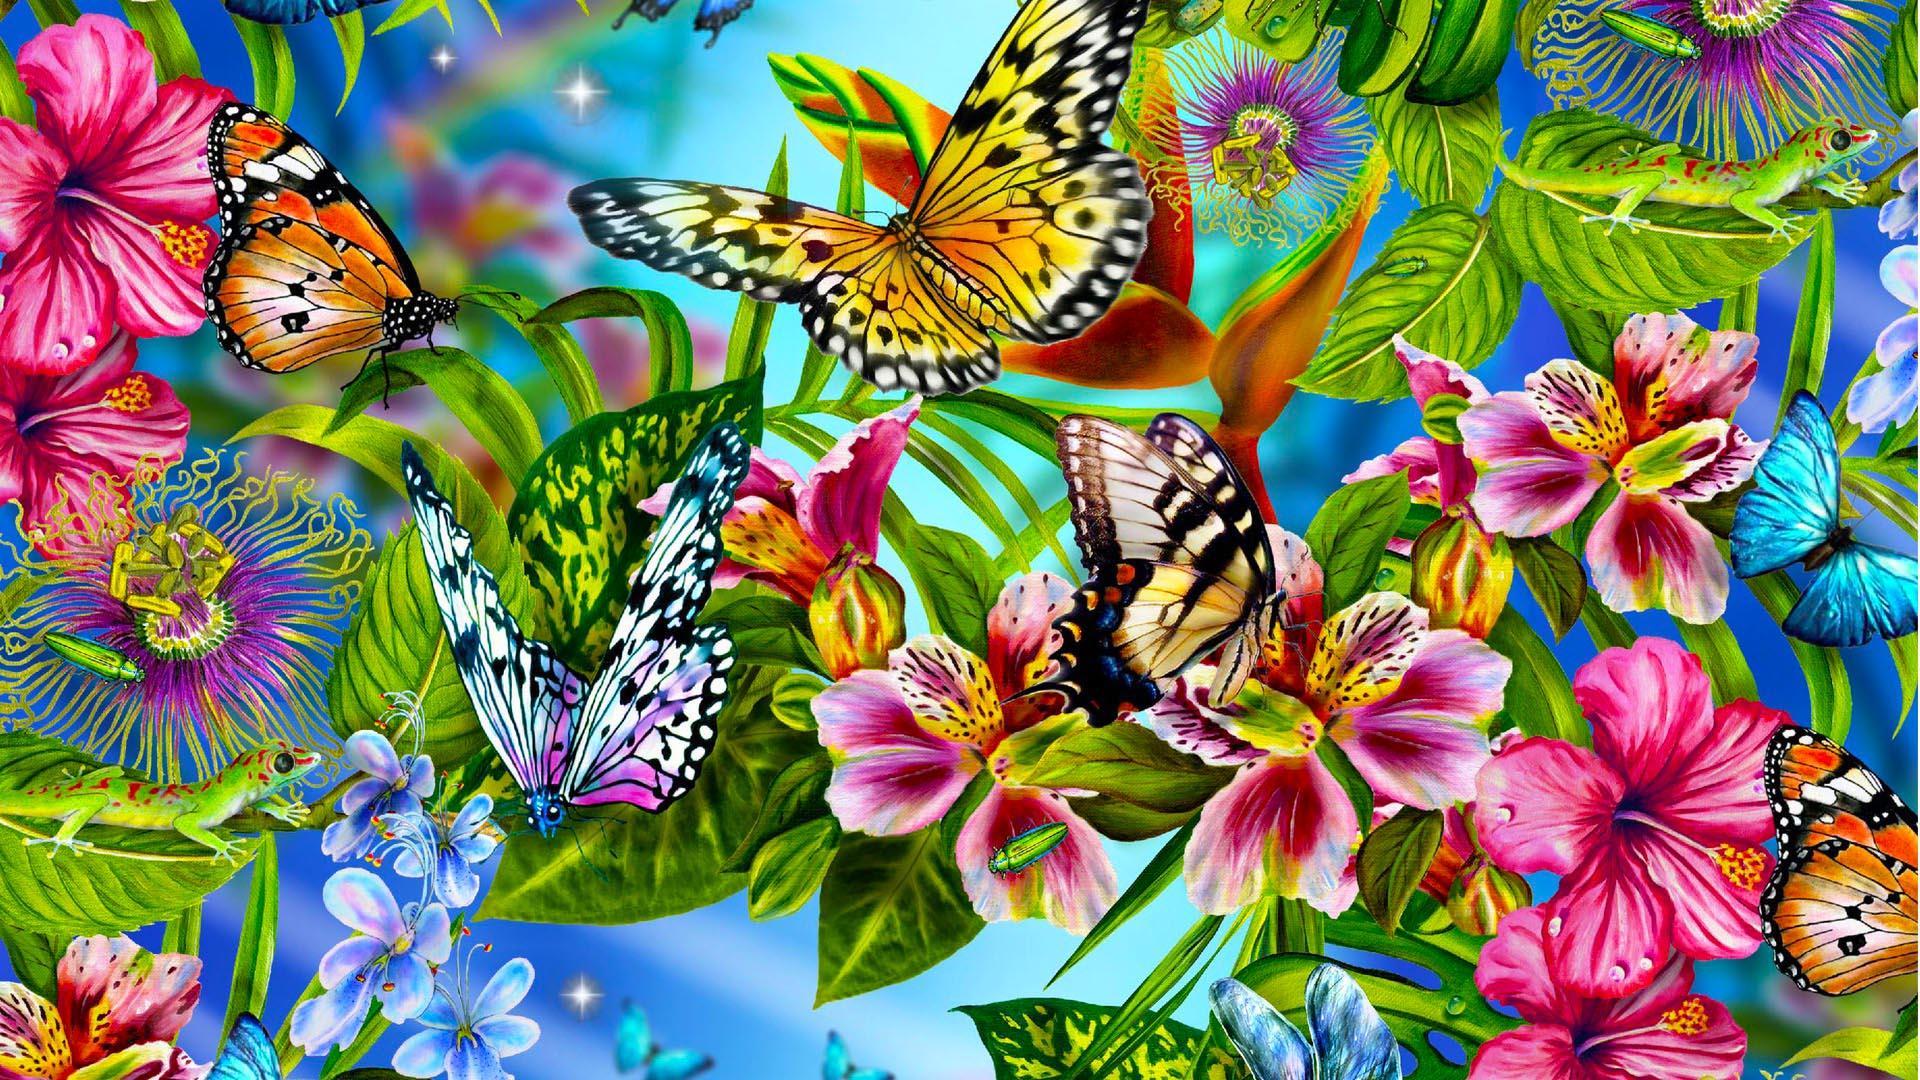 Dark Purple Flowers With Butterflies Wallpaper Wallpapers Background  Beautiful Purple Picture Background Image And Wallpaper for Free Download